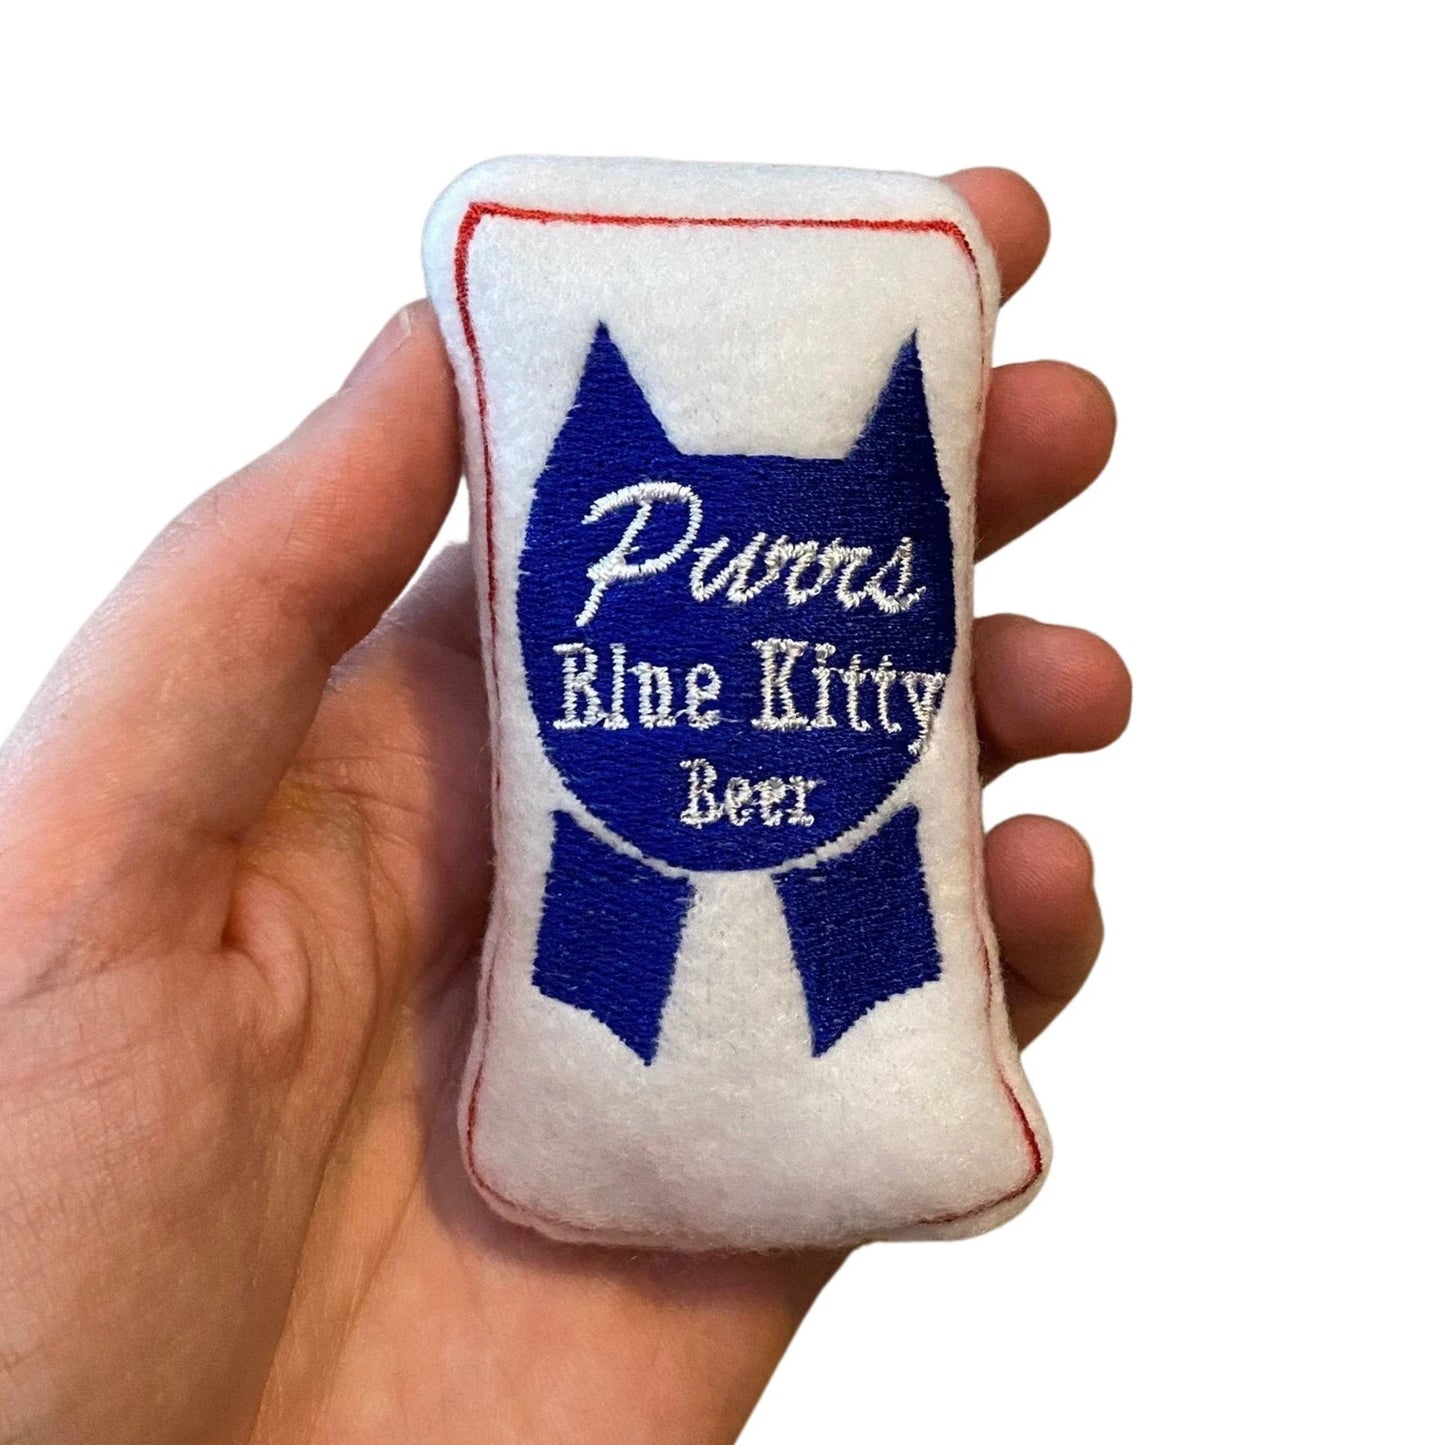 Purrs Blue Kitty Pabst Beer Cat Toy - Catnip Handmade Custom Toy